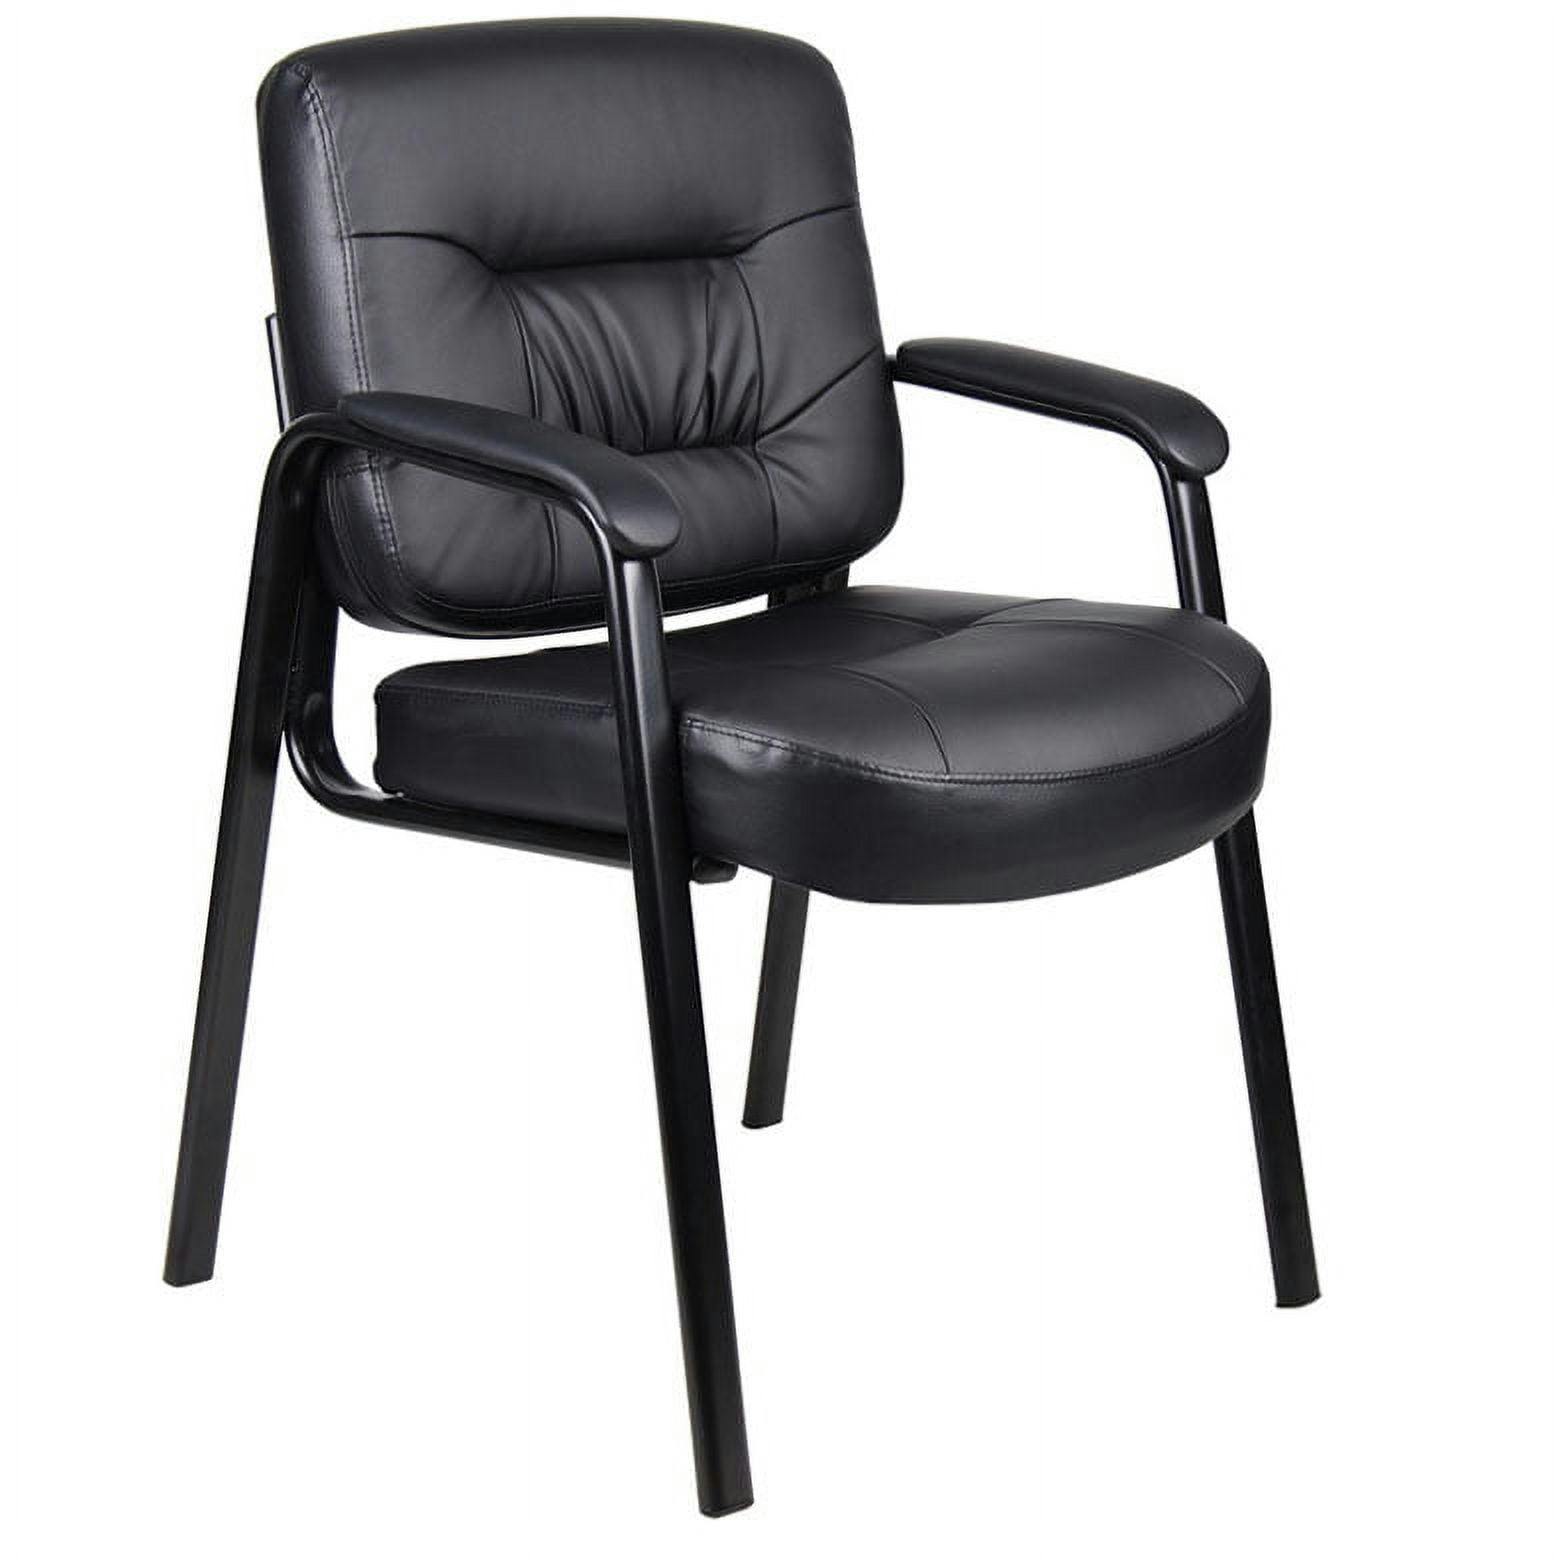 Elegant Black LeatherPlus Guest Chair with Steel Frame and Fixed Arms